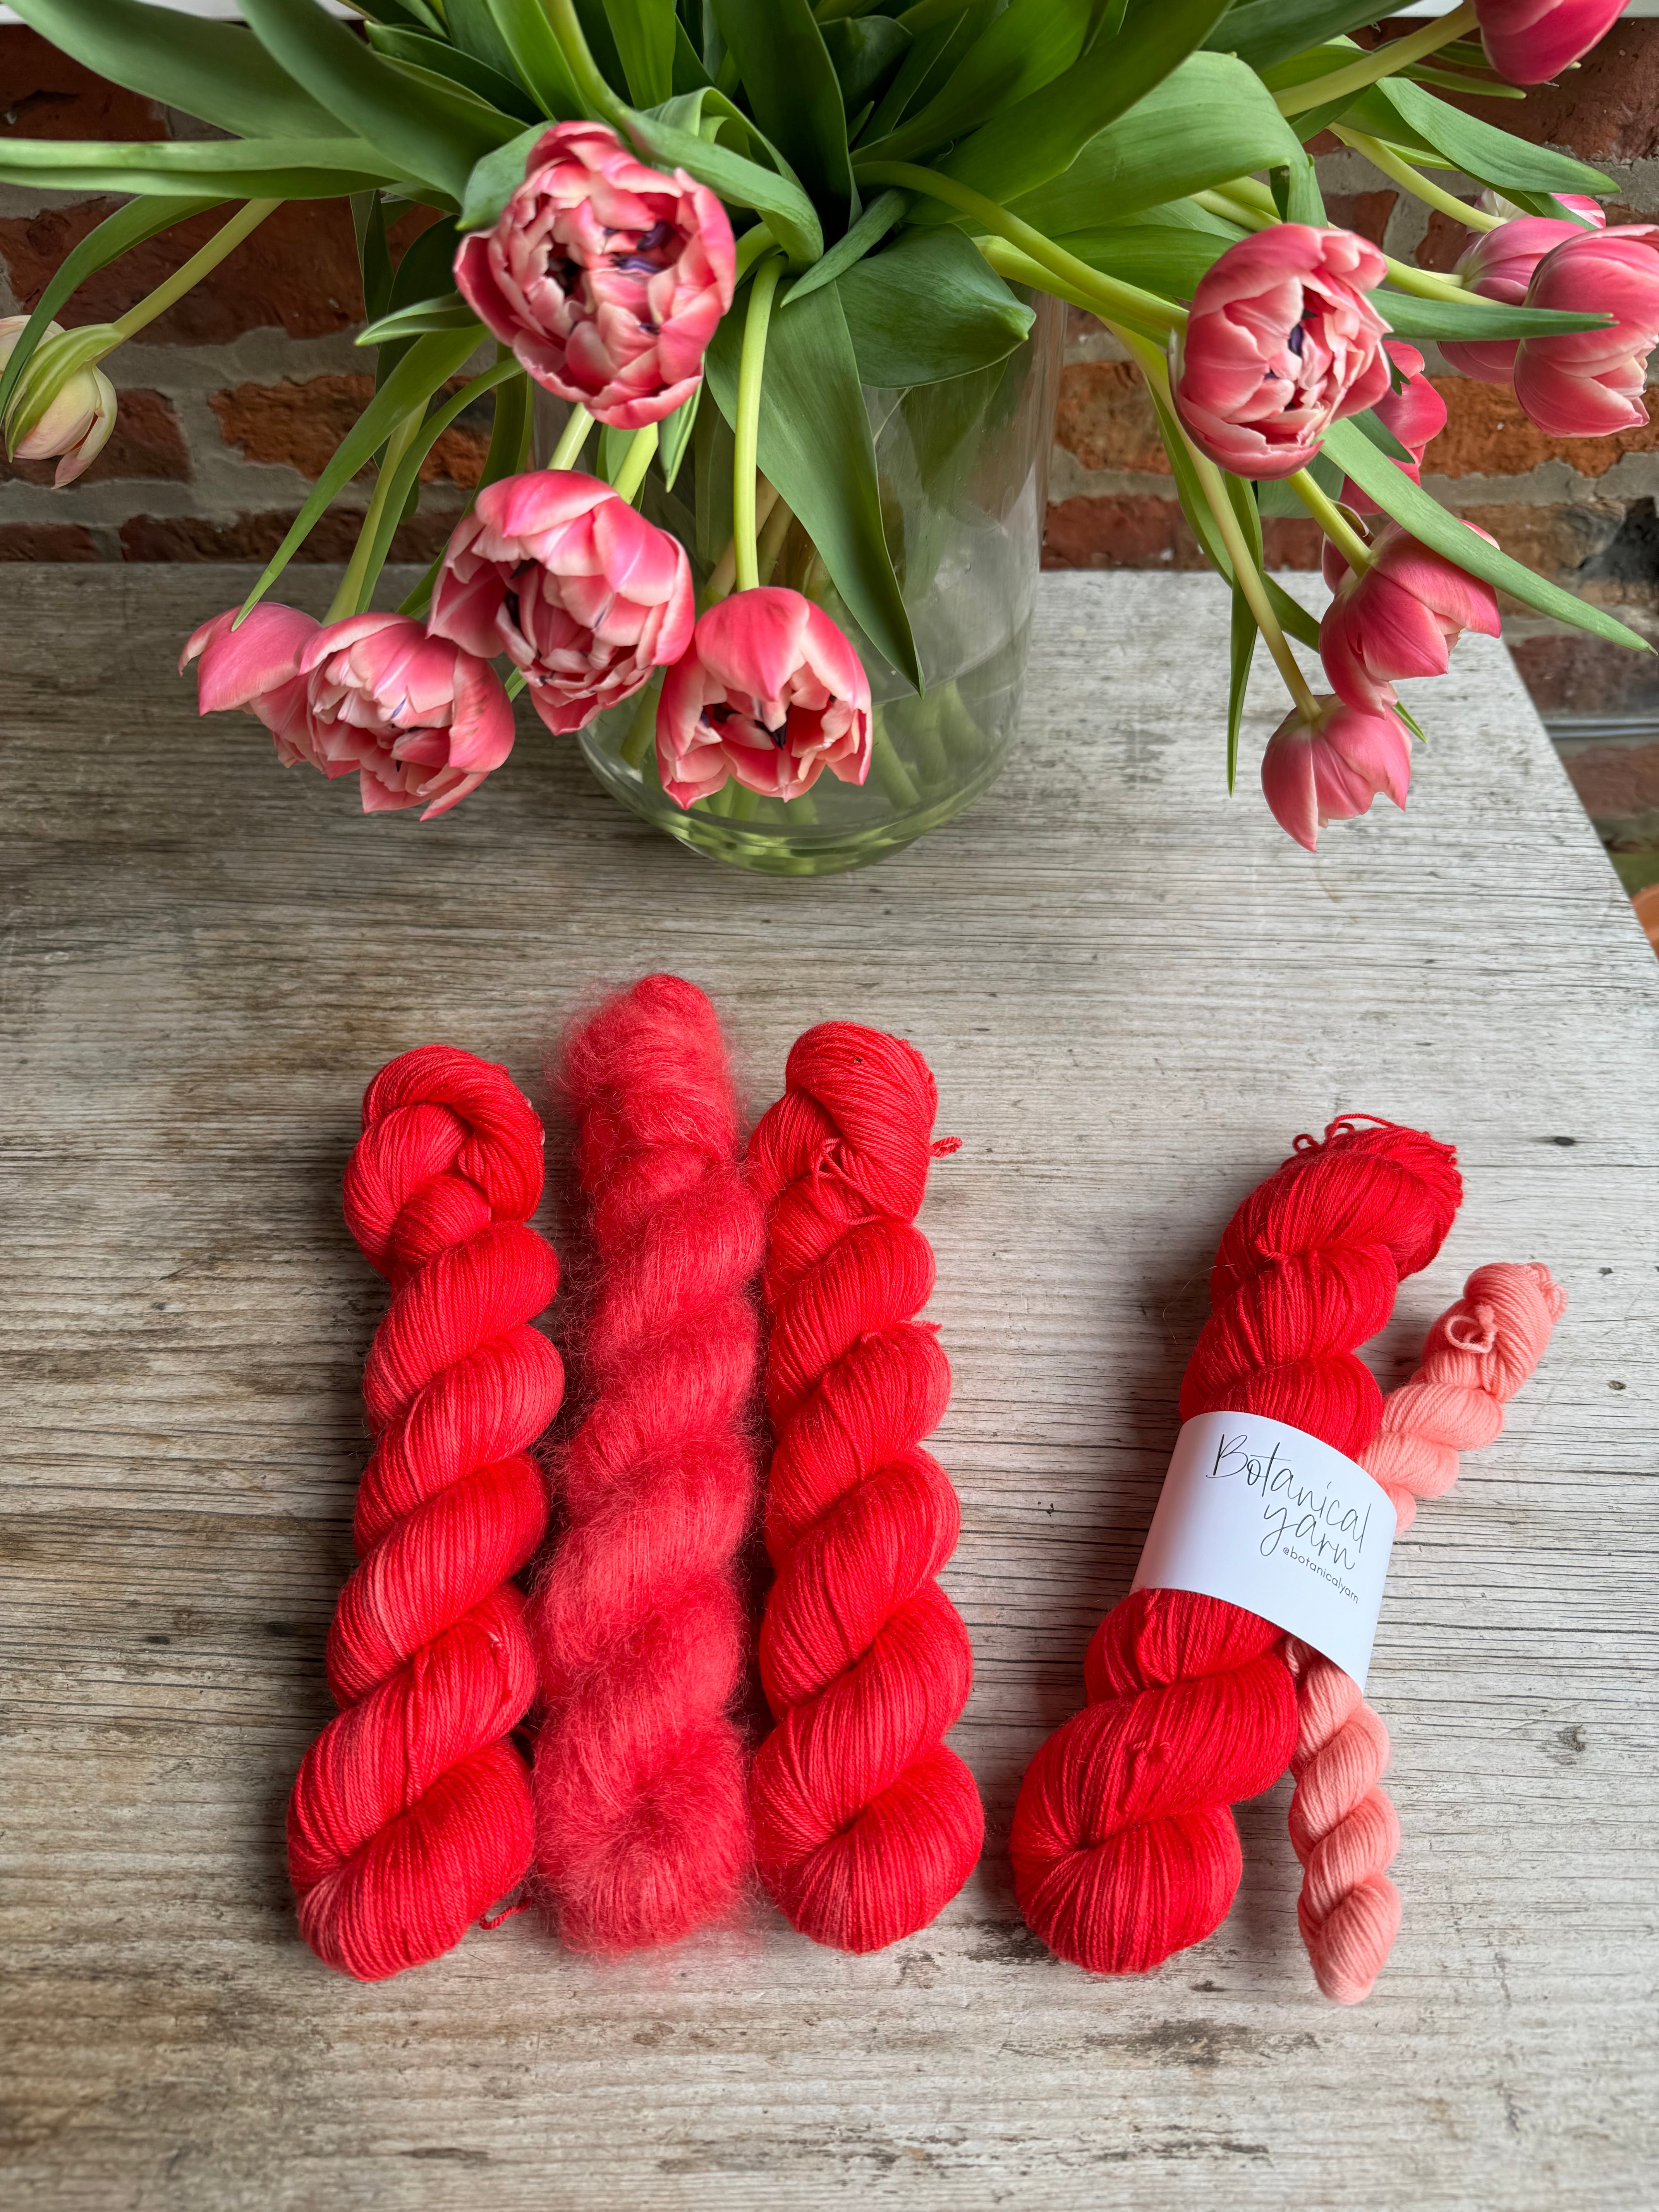 Dyed to order - Tulip Red Riding Hood